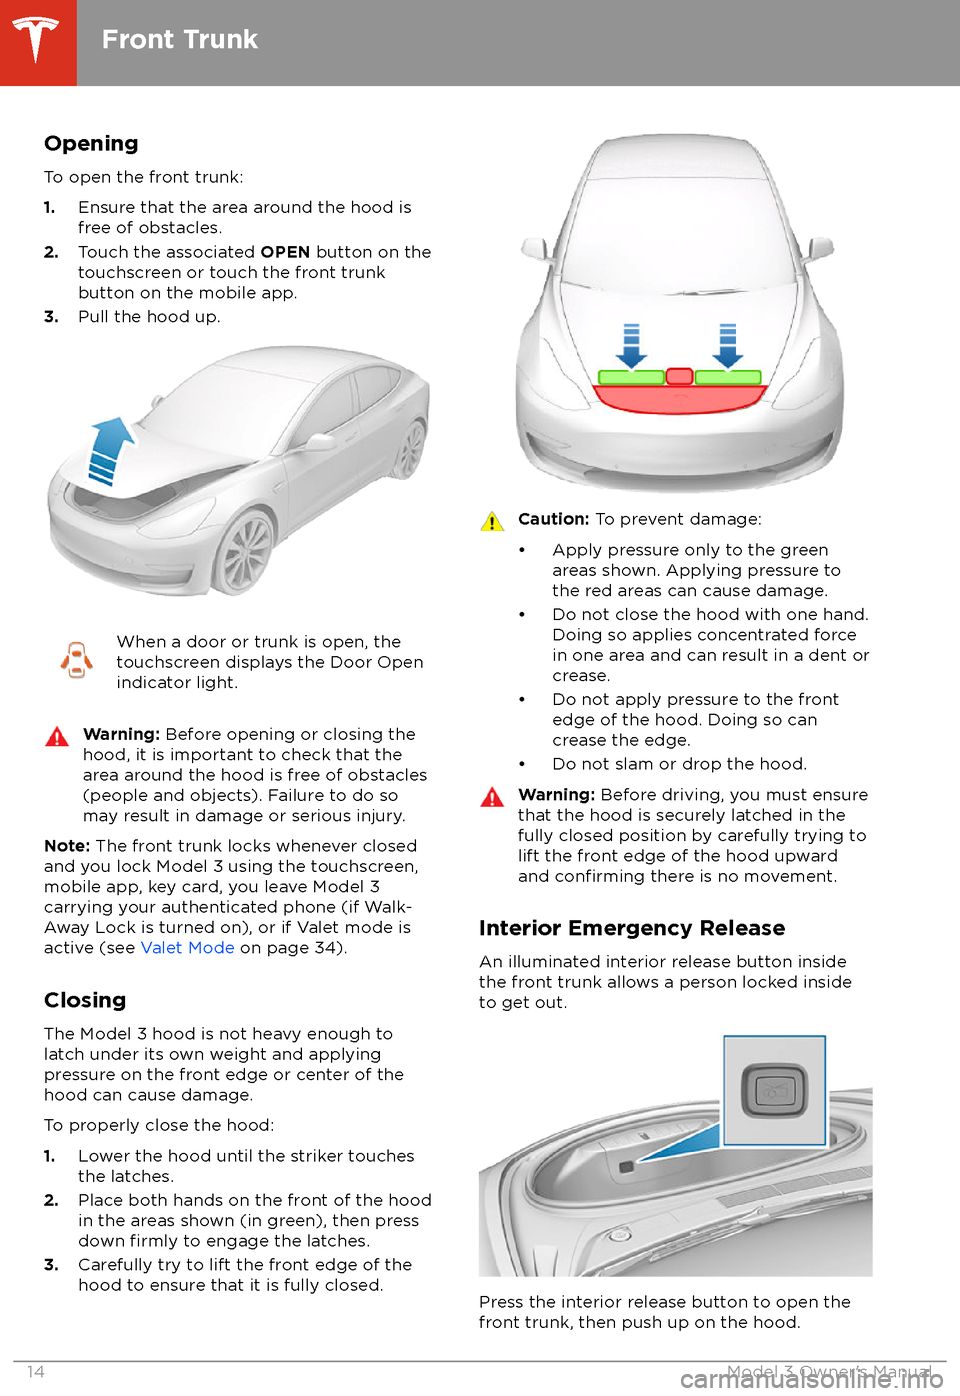 TESLA MODEL 3 2018  Owners Manual Opening
To open the front trunk:
1. Ensure that the area around the hood is
free of obstacles.
2. Touch the associated  OPEN button on the
touchscreen or touch the front trunk
button on the mobile app